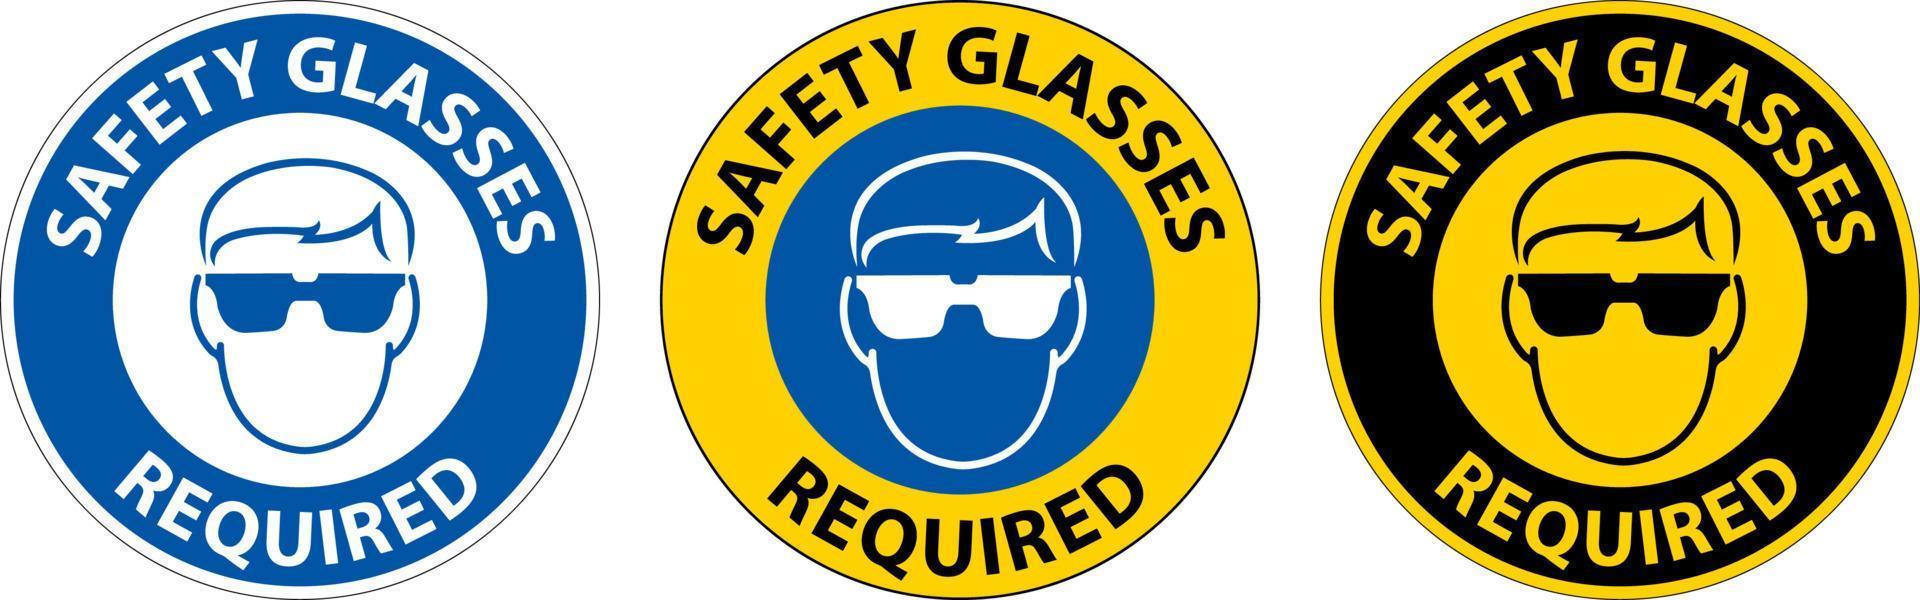 Floor Sign, Safety Glasses Required vector